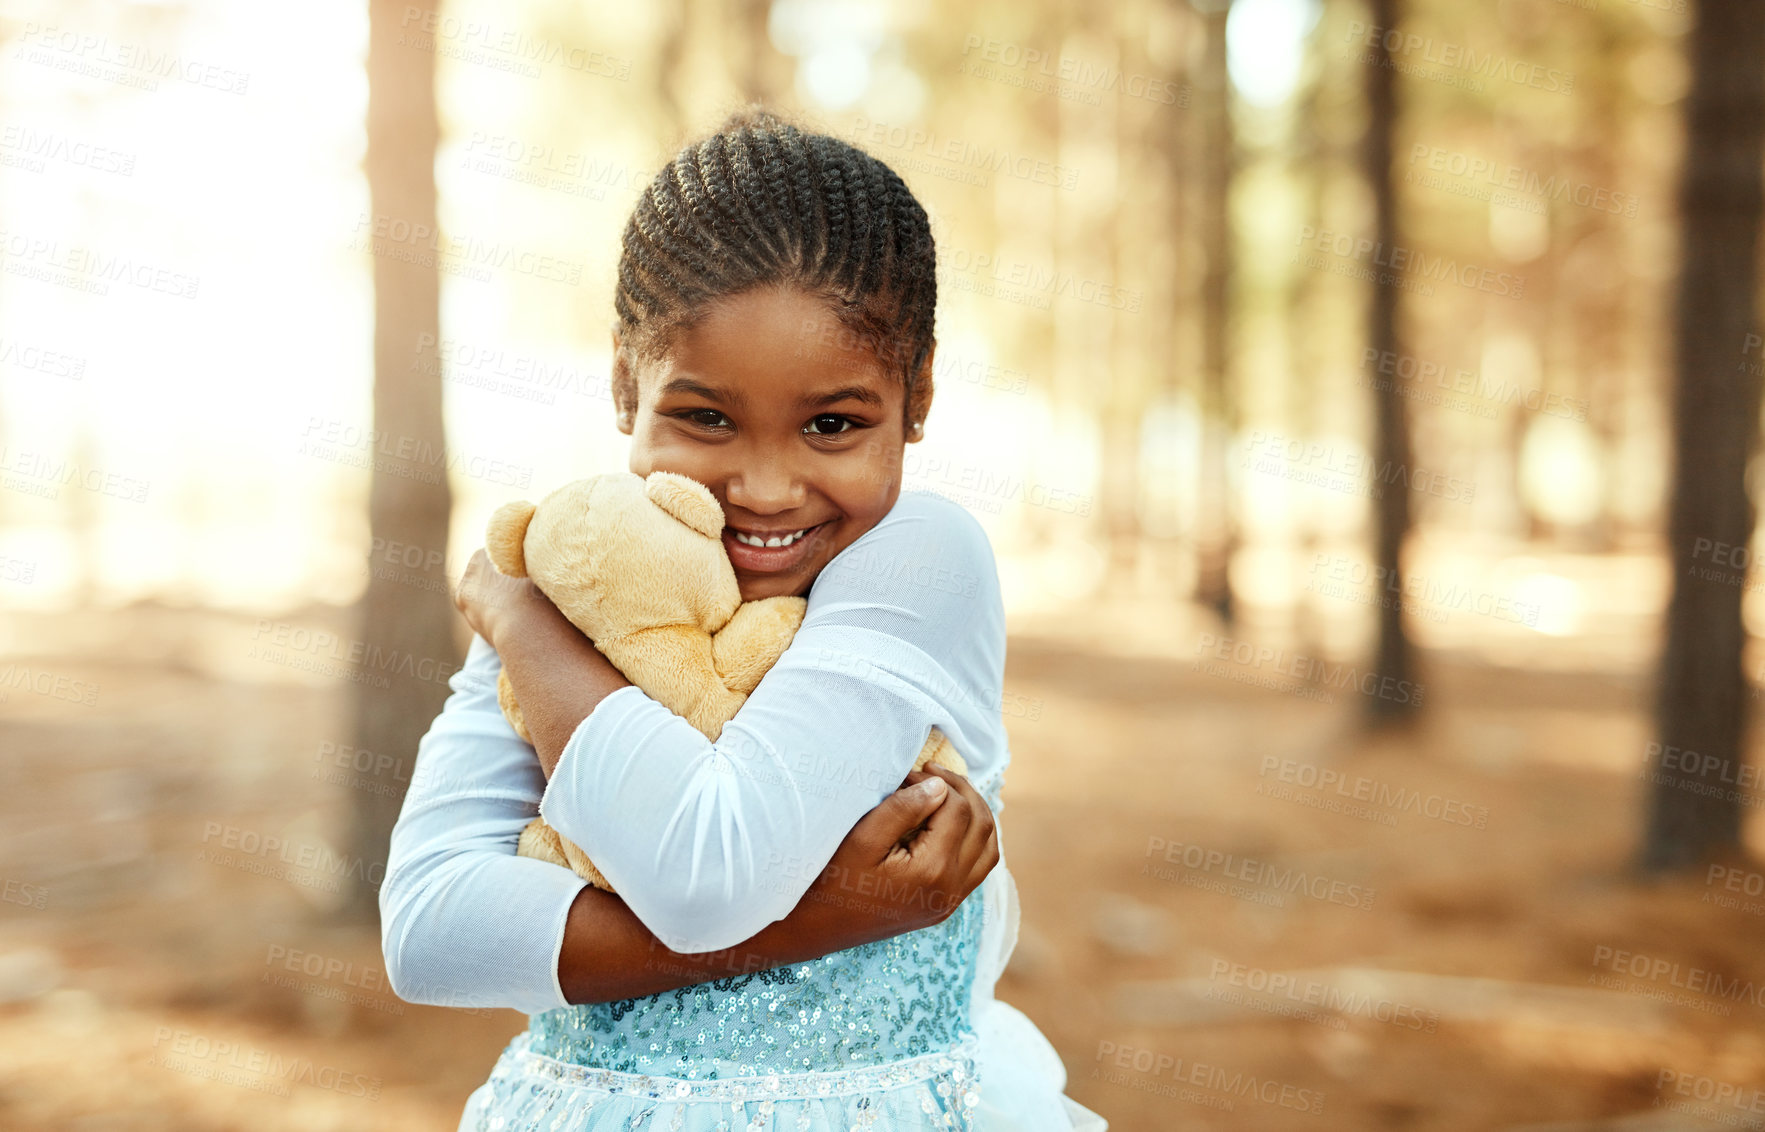 Buy stock photo Portrait of a little girl playing in the woods with her teddybear